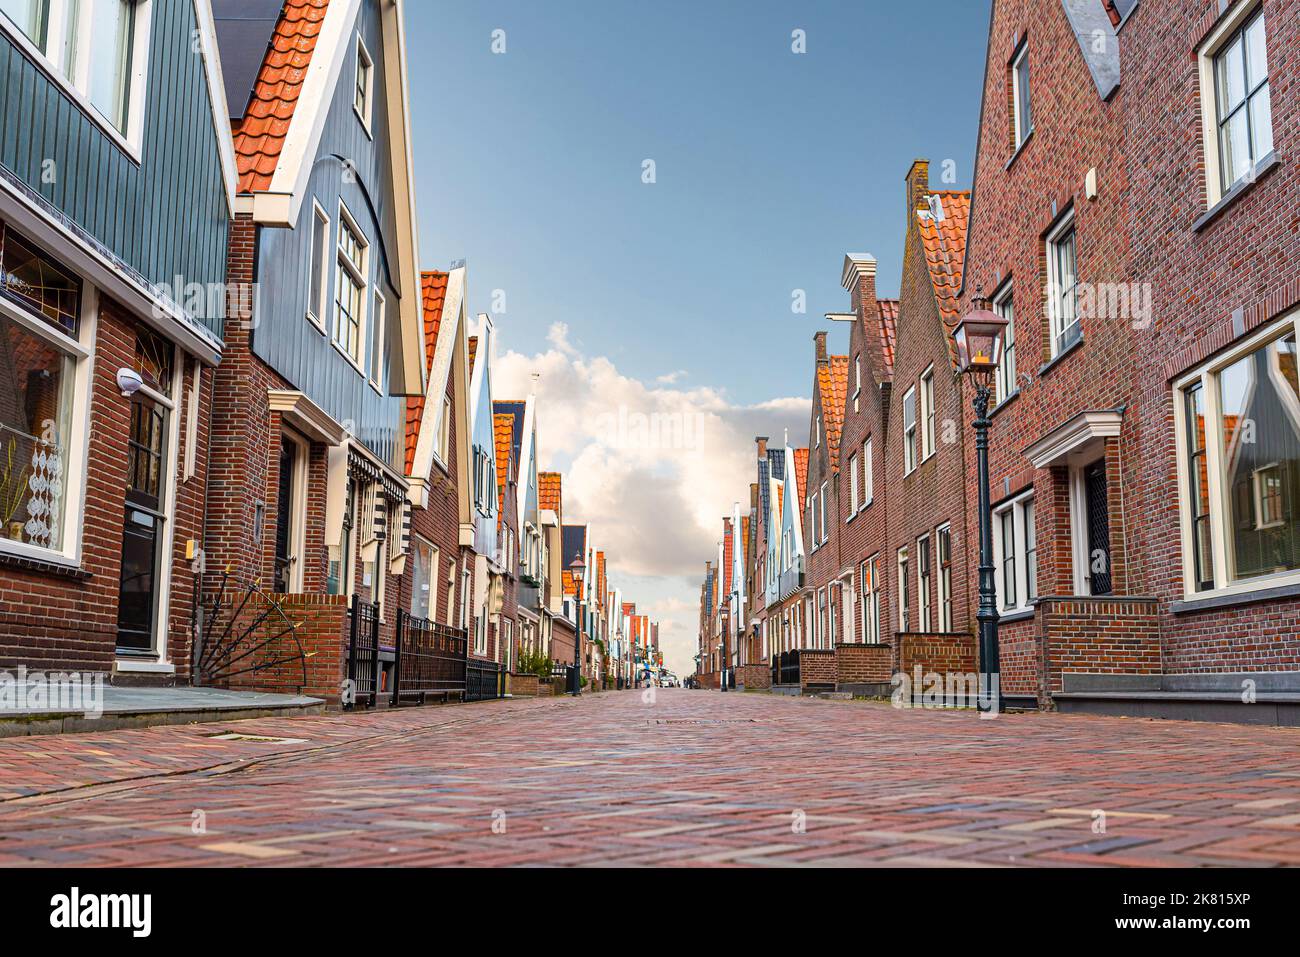 low angle view of cobbled street and typical buildings in dutch town of Volendam against blue sky Stock Photo